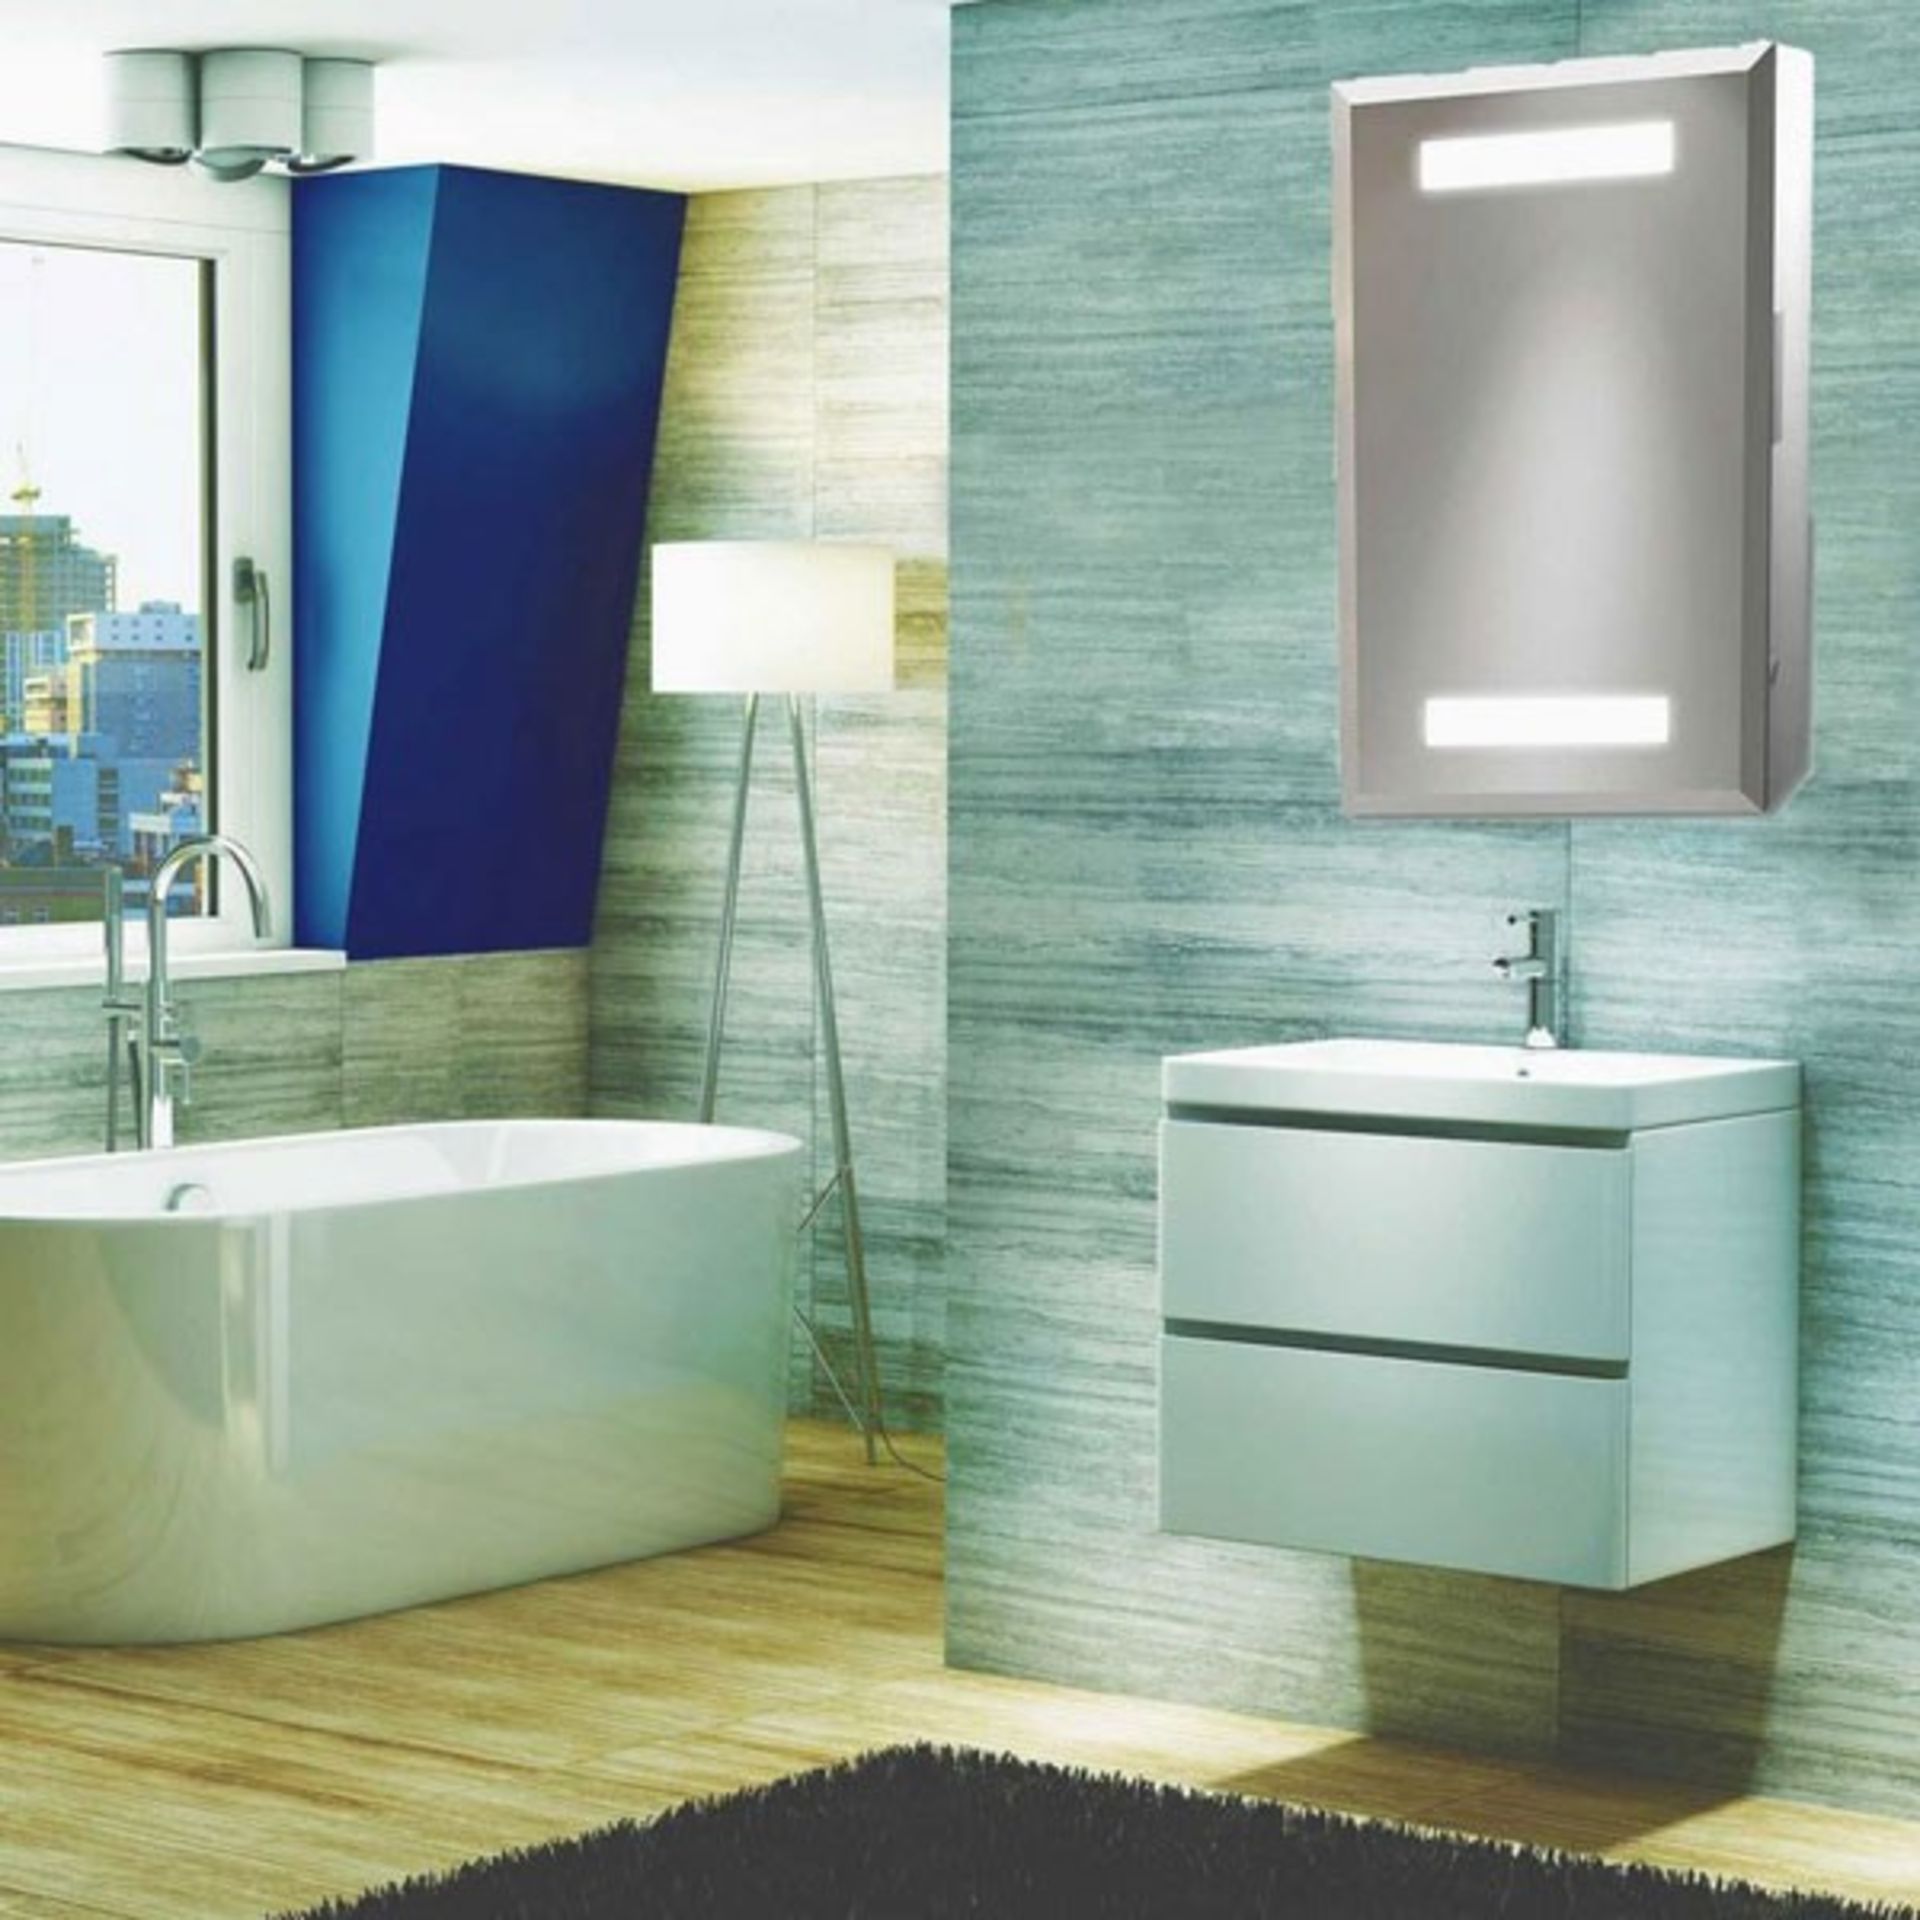 1 x Synergy Single Door Aluminium LED Mirrored Bathroom Cabinet - Contemporary Cabinet With - Image 11 of 14